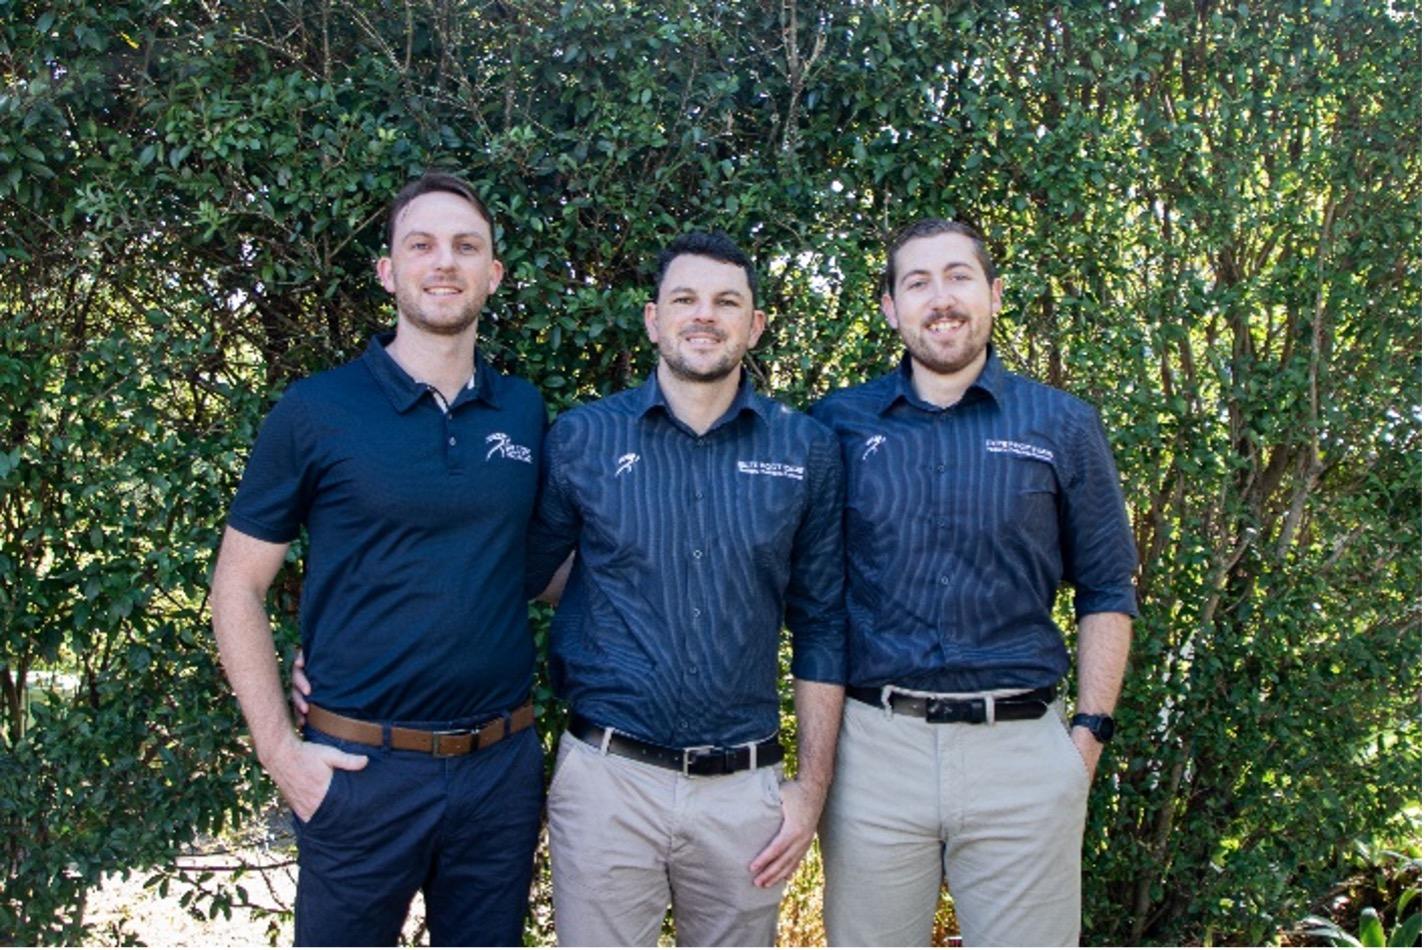 The Elite Foot Care team pictured, (Left to right) Will, Jay and Jarrod.